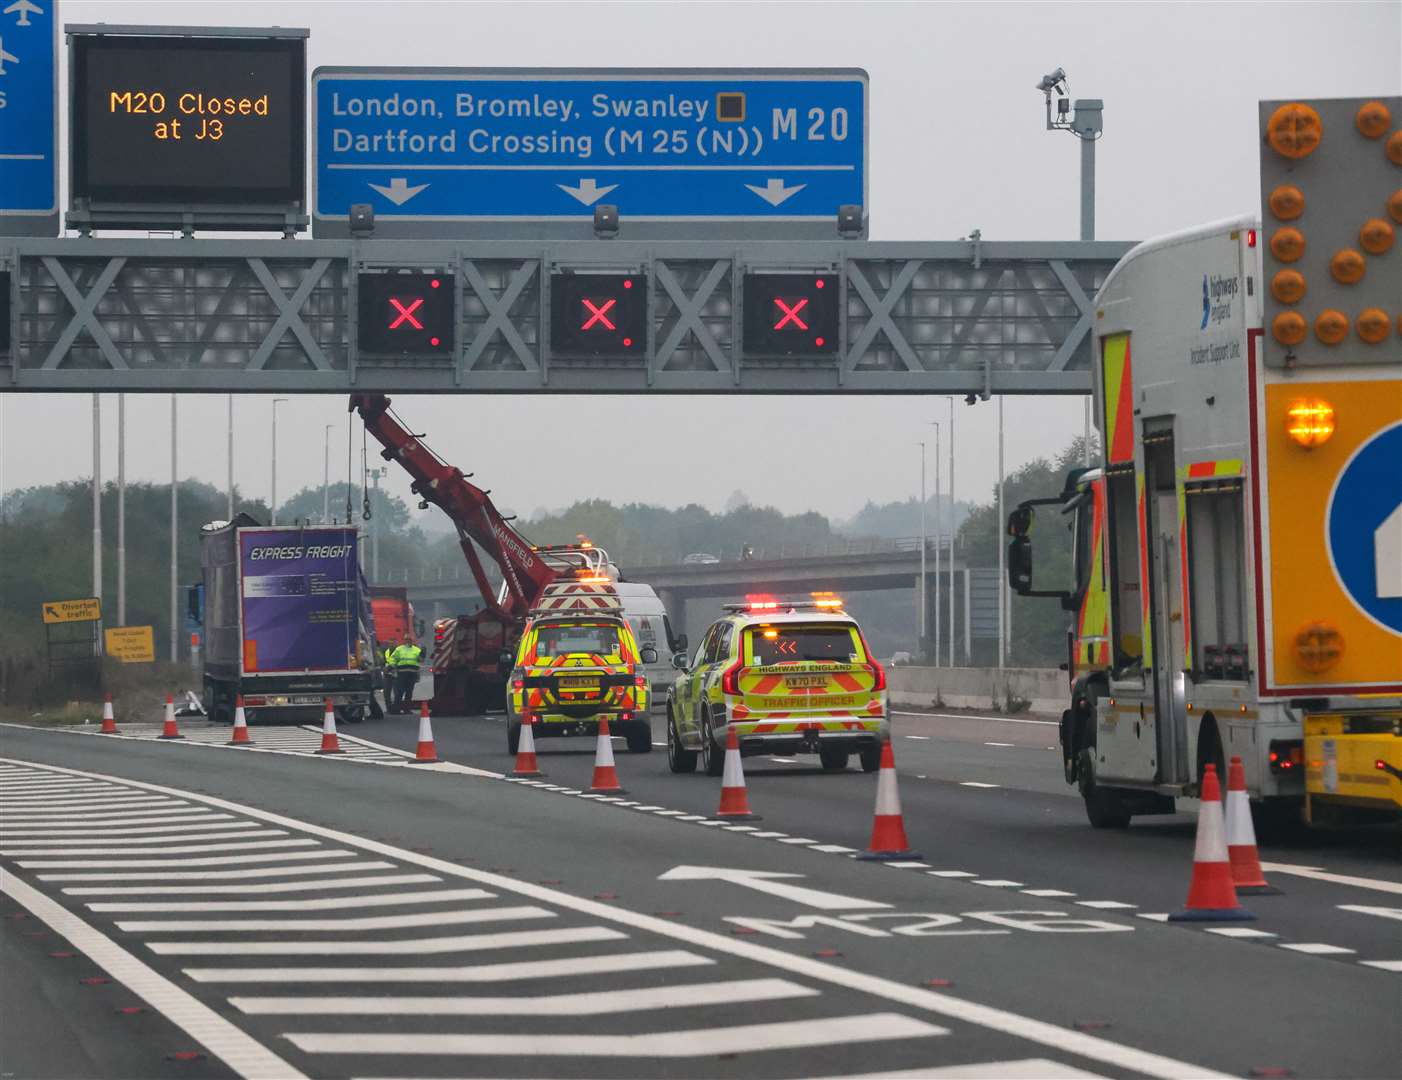 Highways Agency staff help keep the road network running and support emergency services